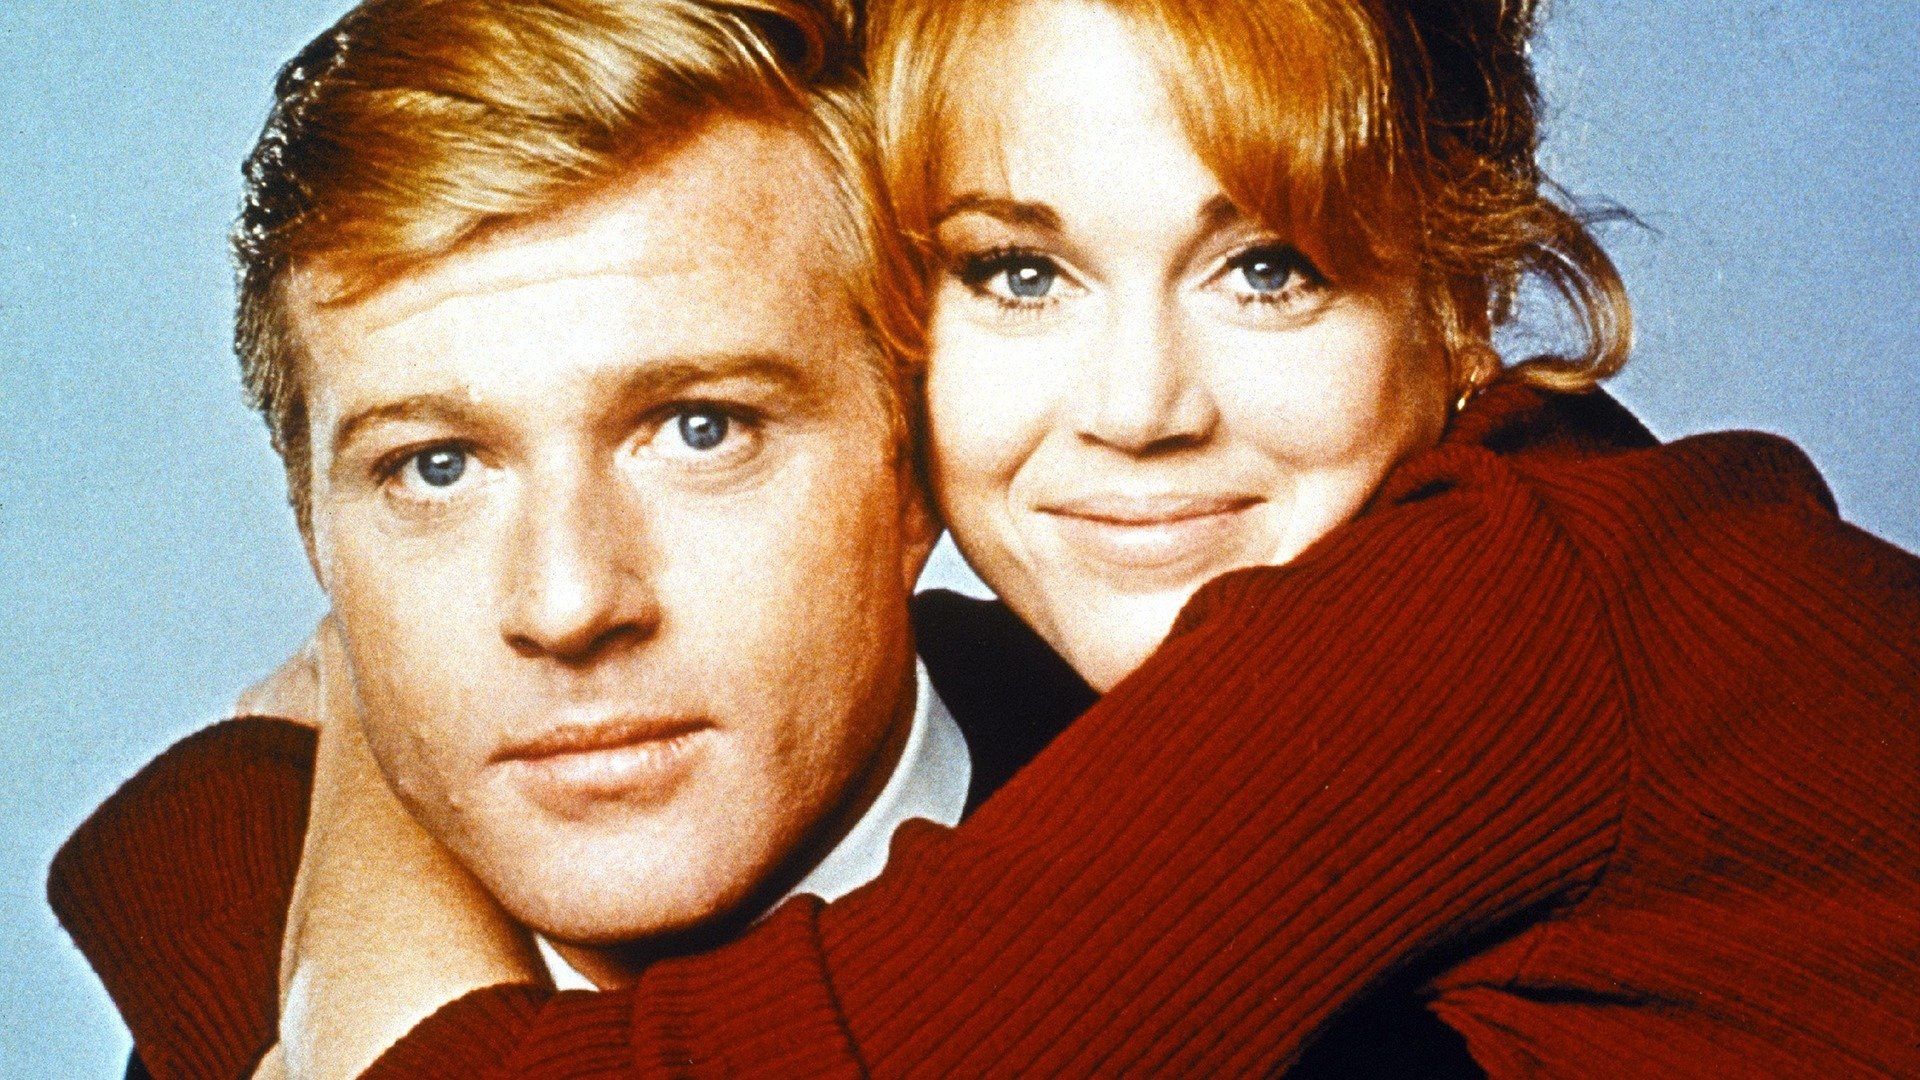 Barefoot in the Park Backdrop